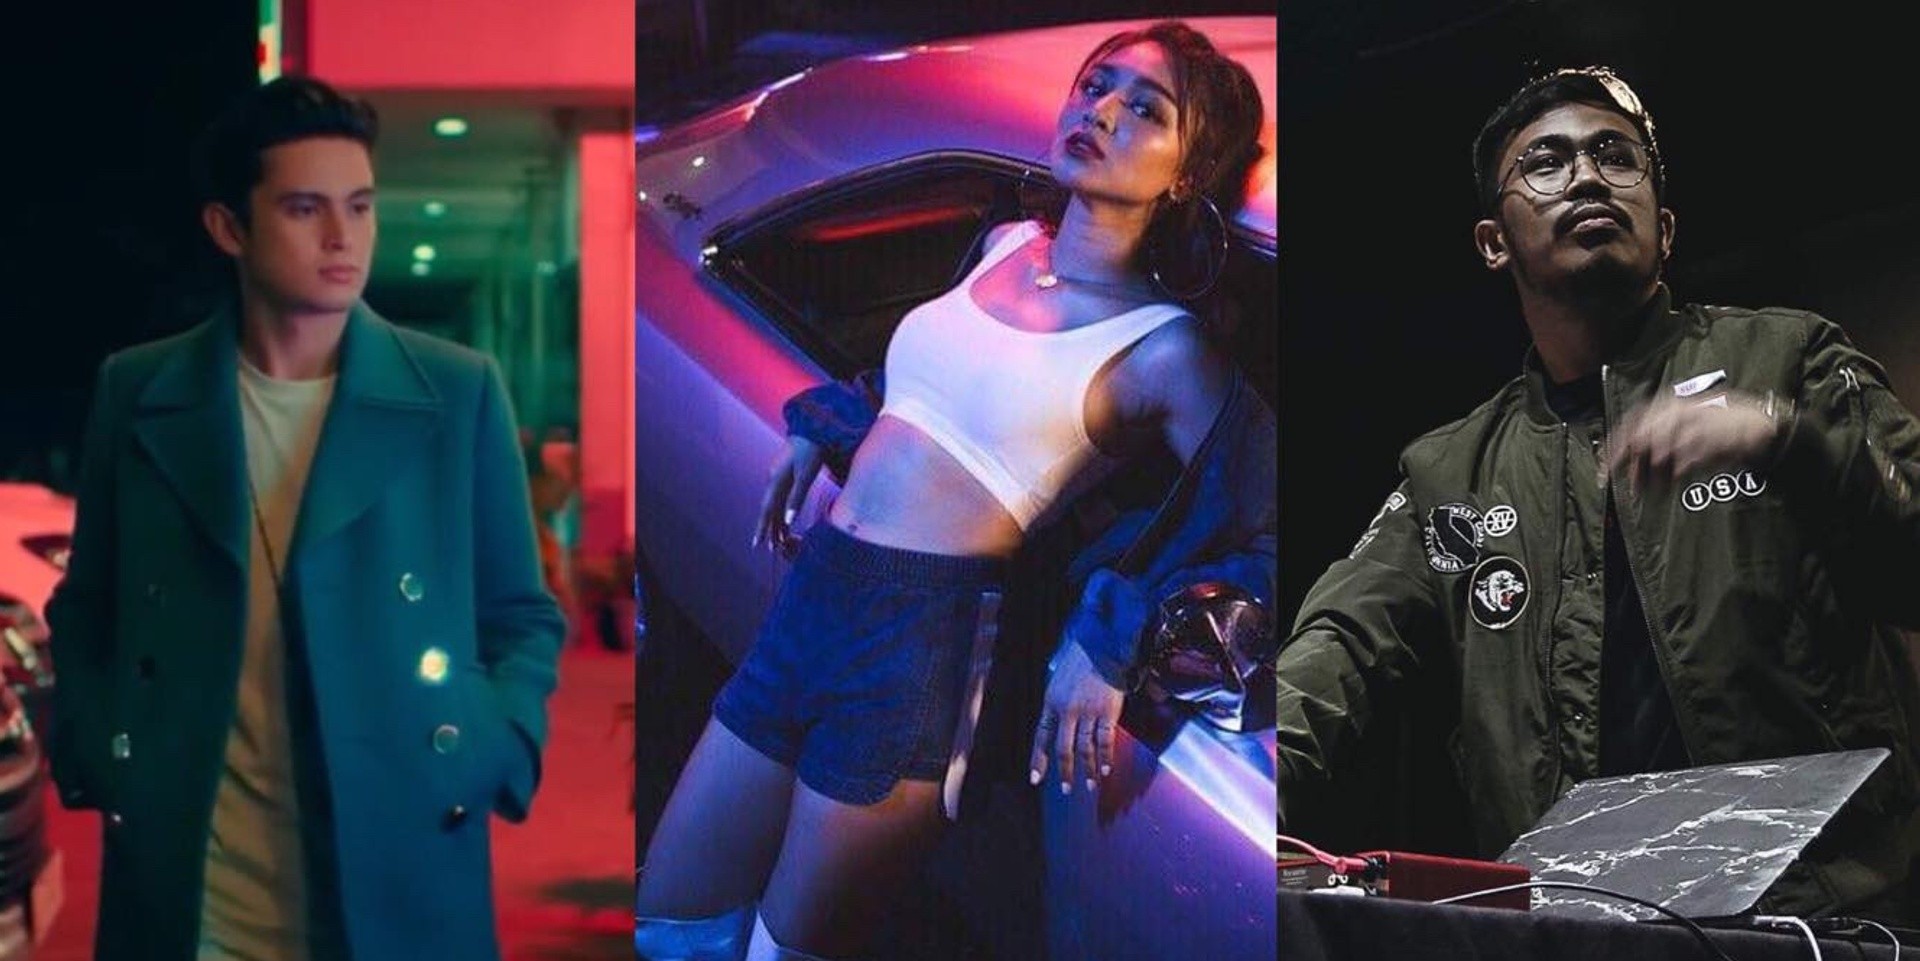 Nadine Lustre enlists James Reid and CRWN for new single, St4y Up – listen